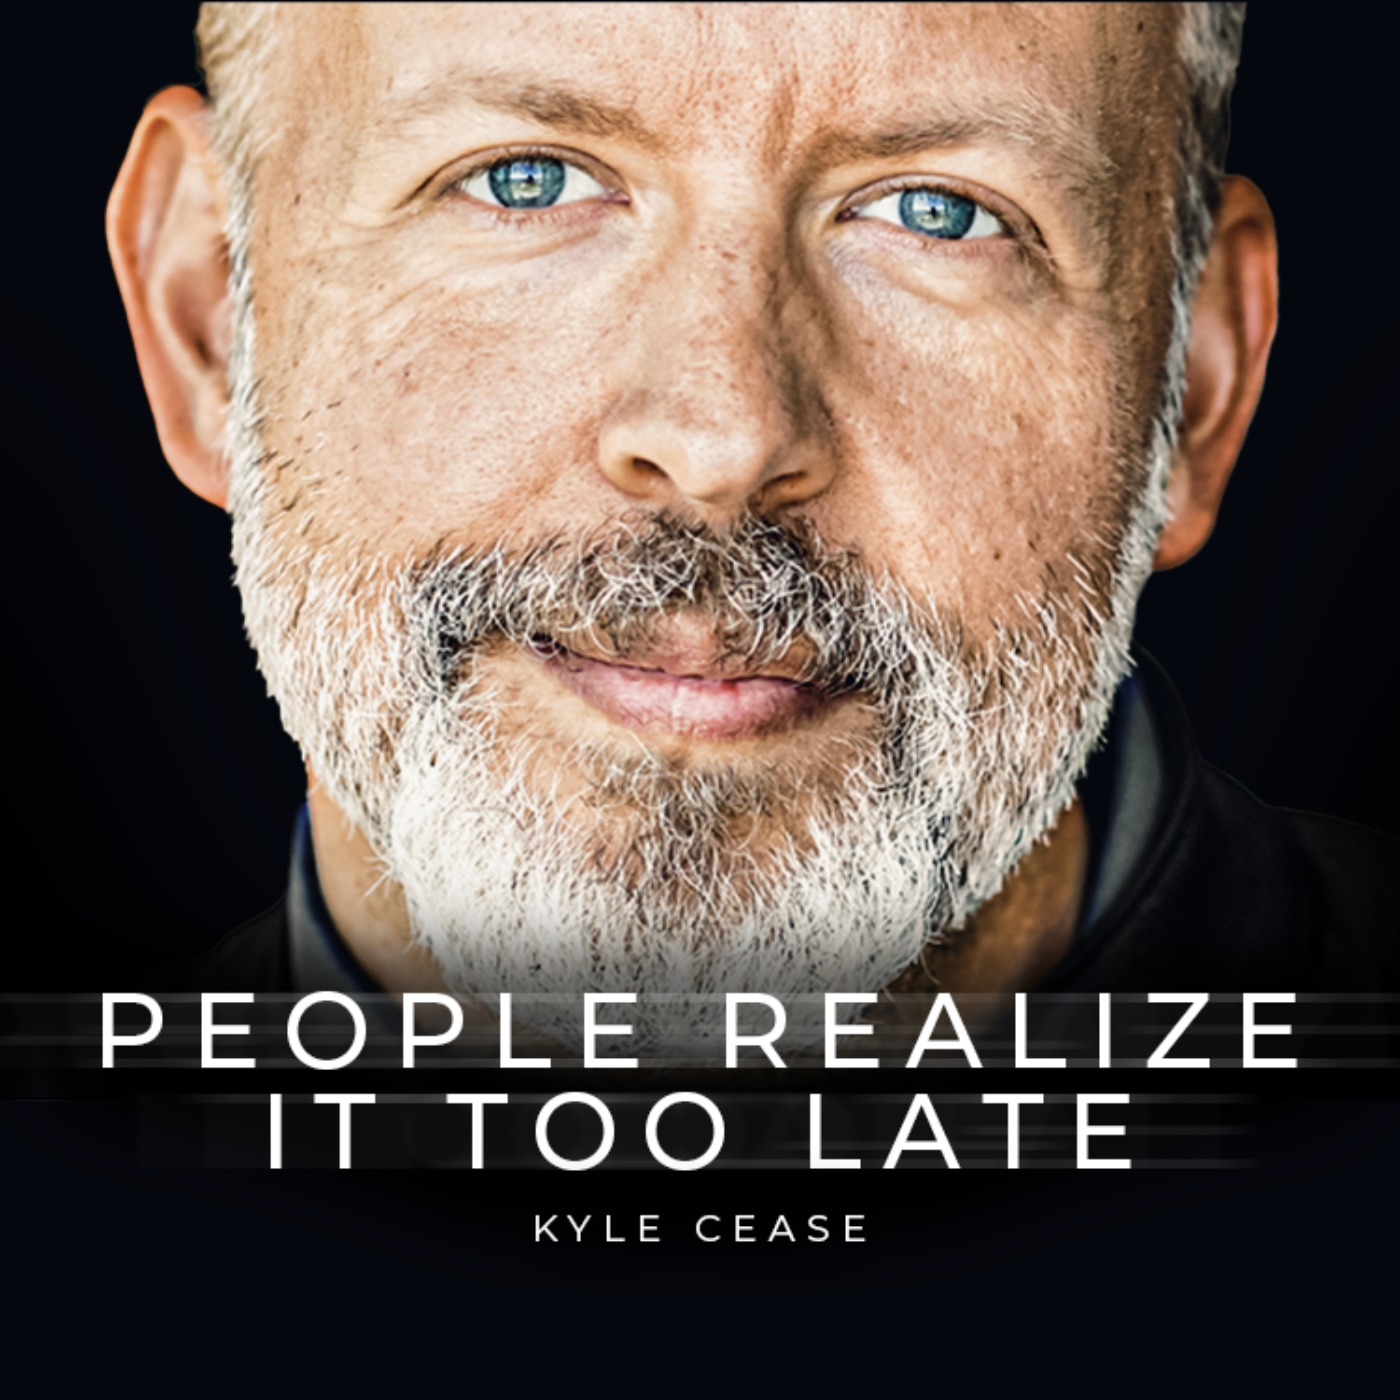 People Realize It Too Late - Kyle Cease’s Powerful Life Message